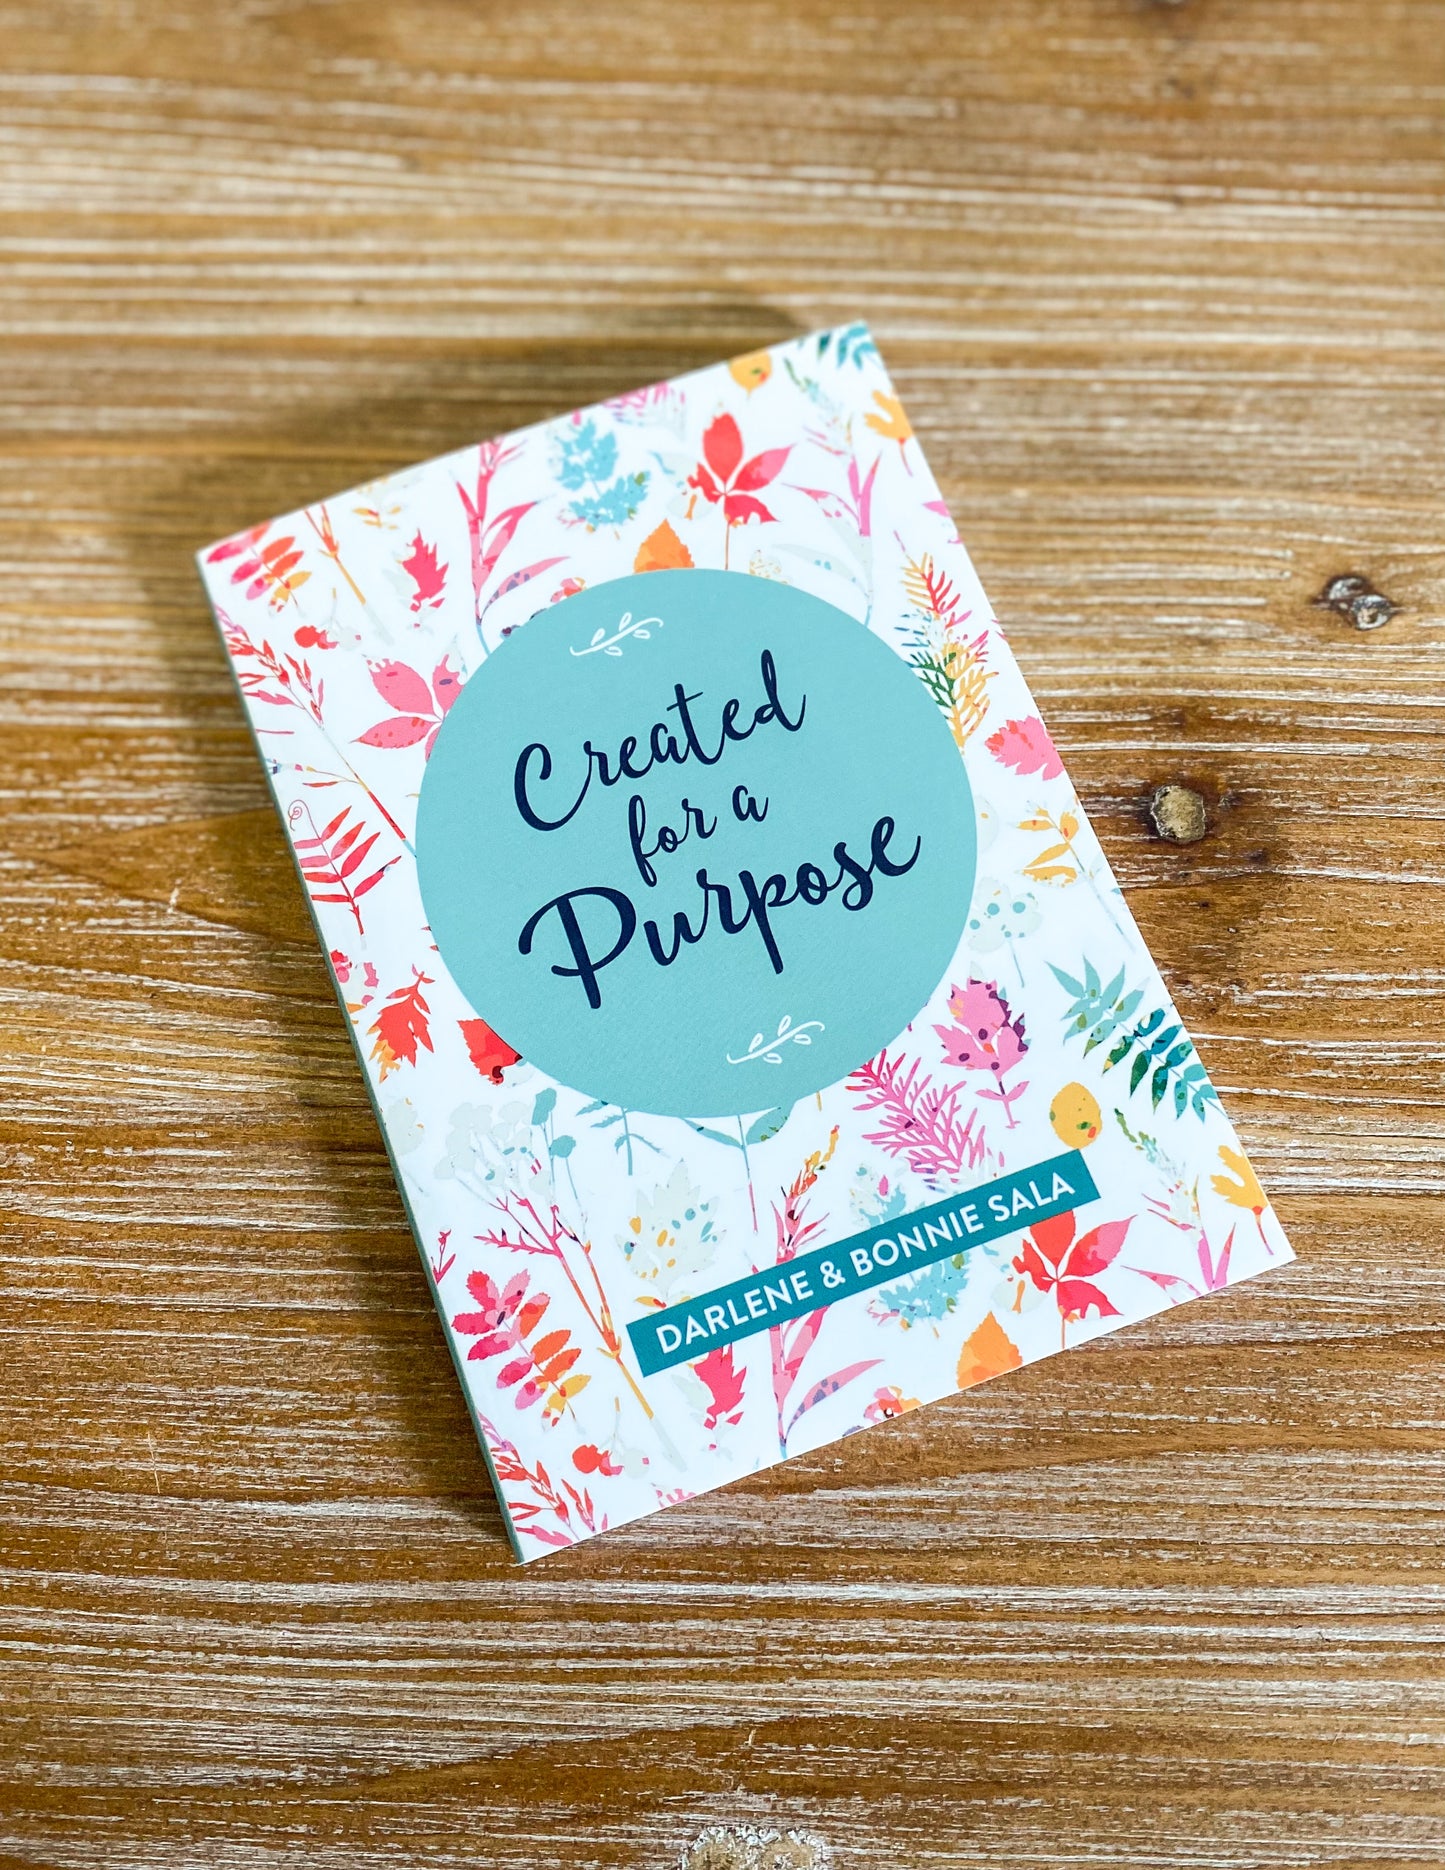 Created for a Purpose - Book